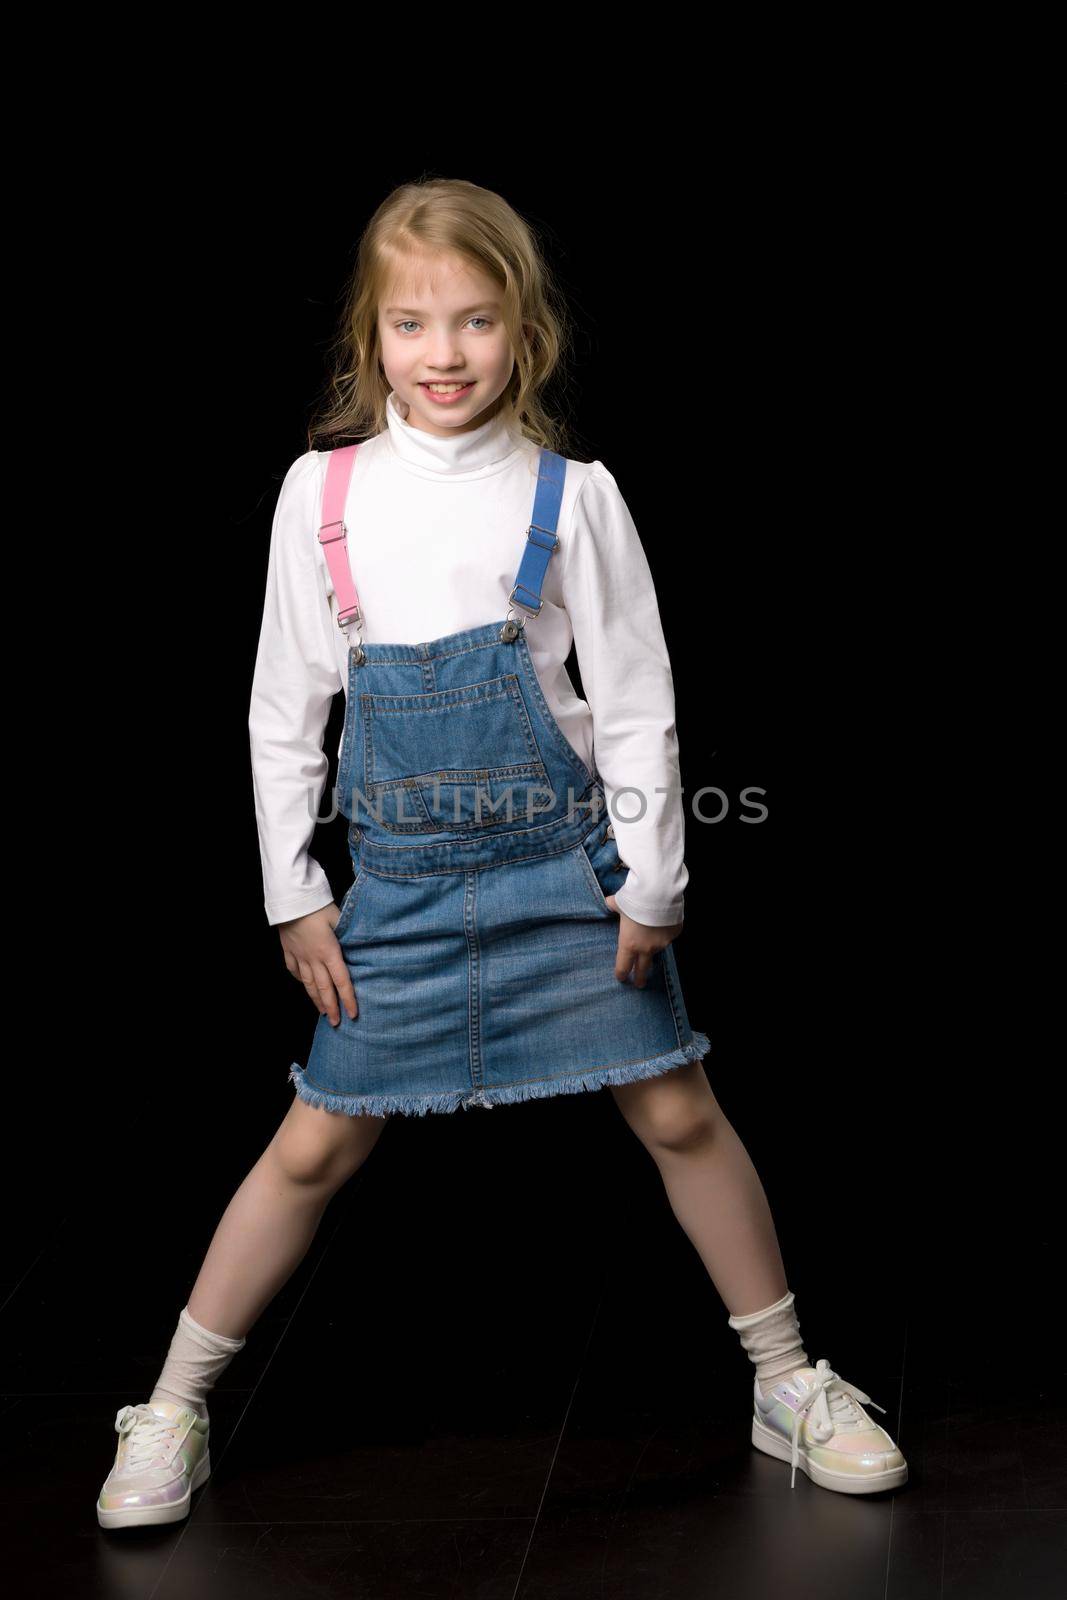 Beautiful little girl in a short denim dress. Concept of beauty and fashion, happy childhood. Isolated.